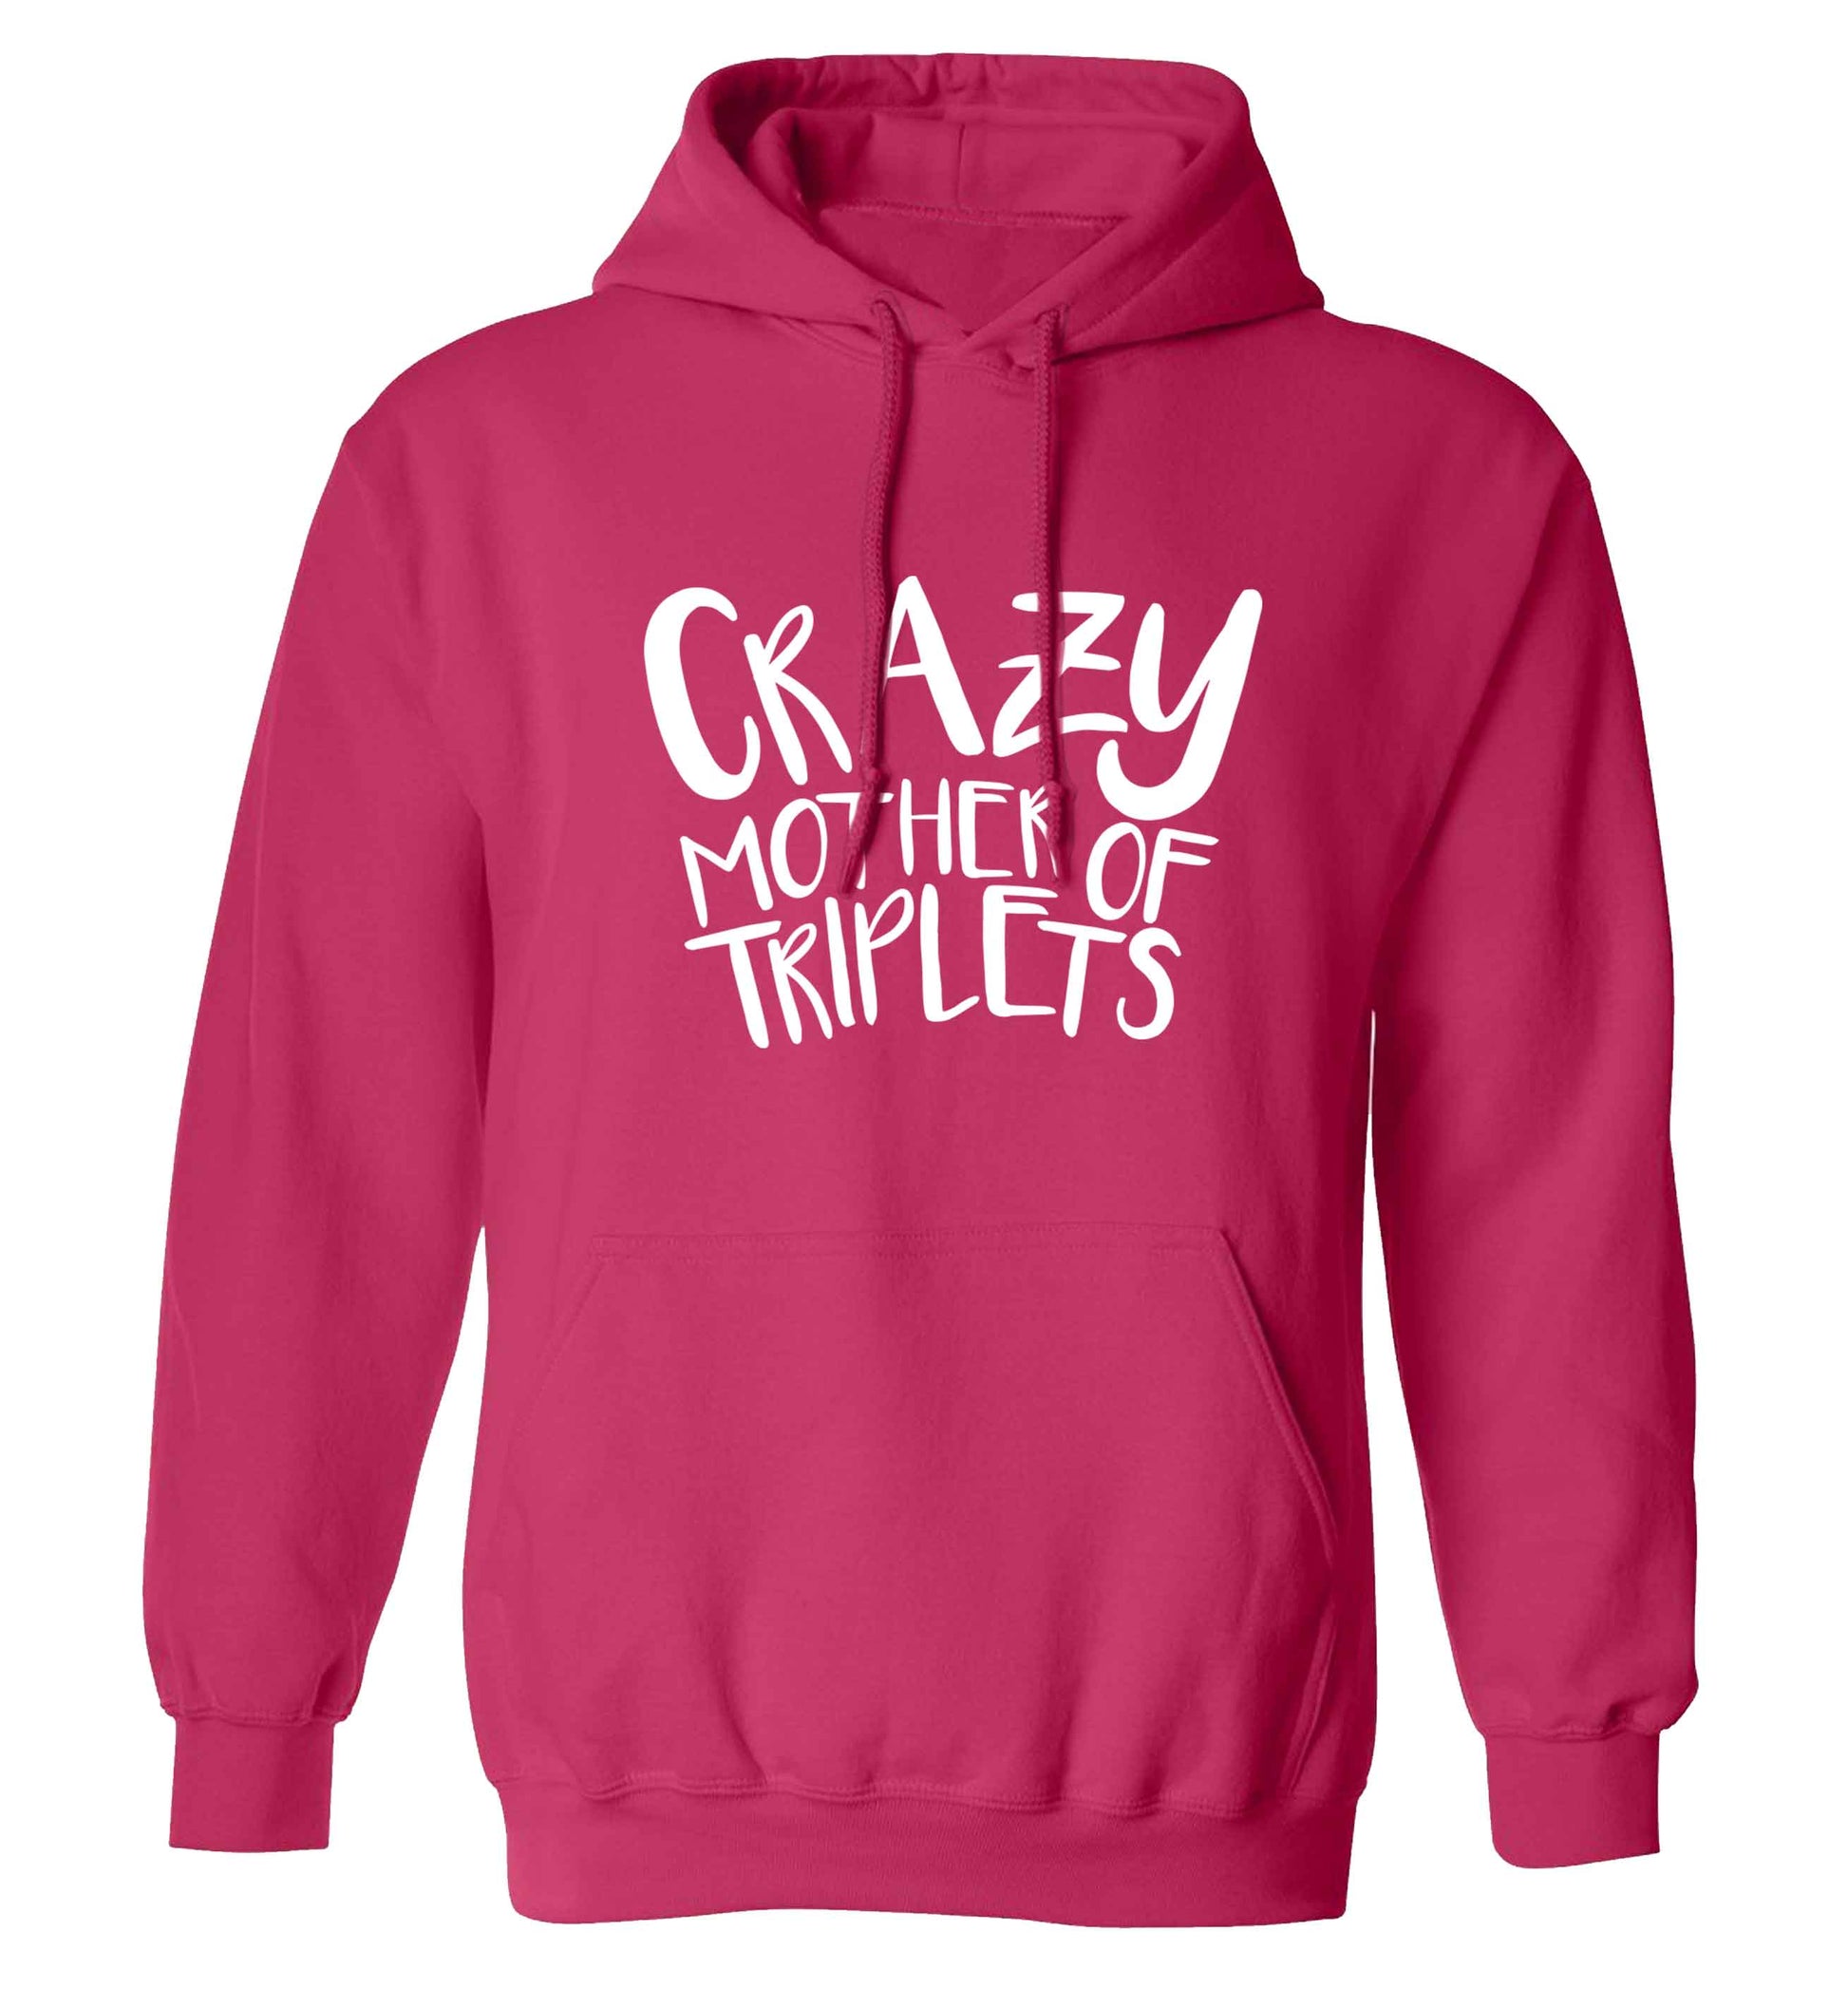 Crazy mother of triplets adults unisex pink hoodie 2XL